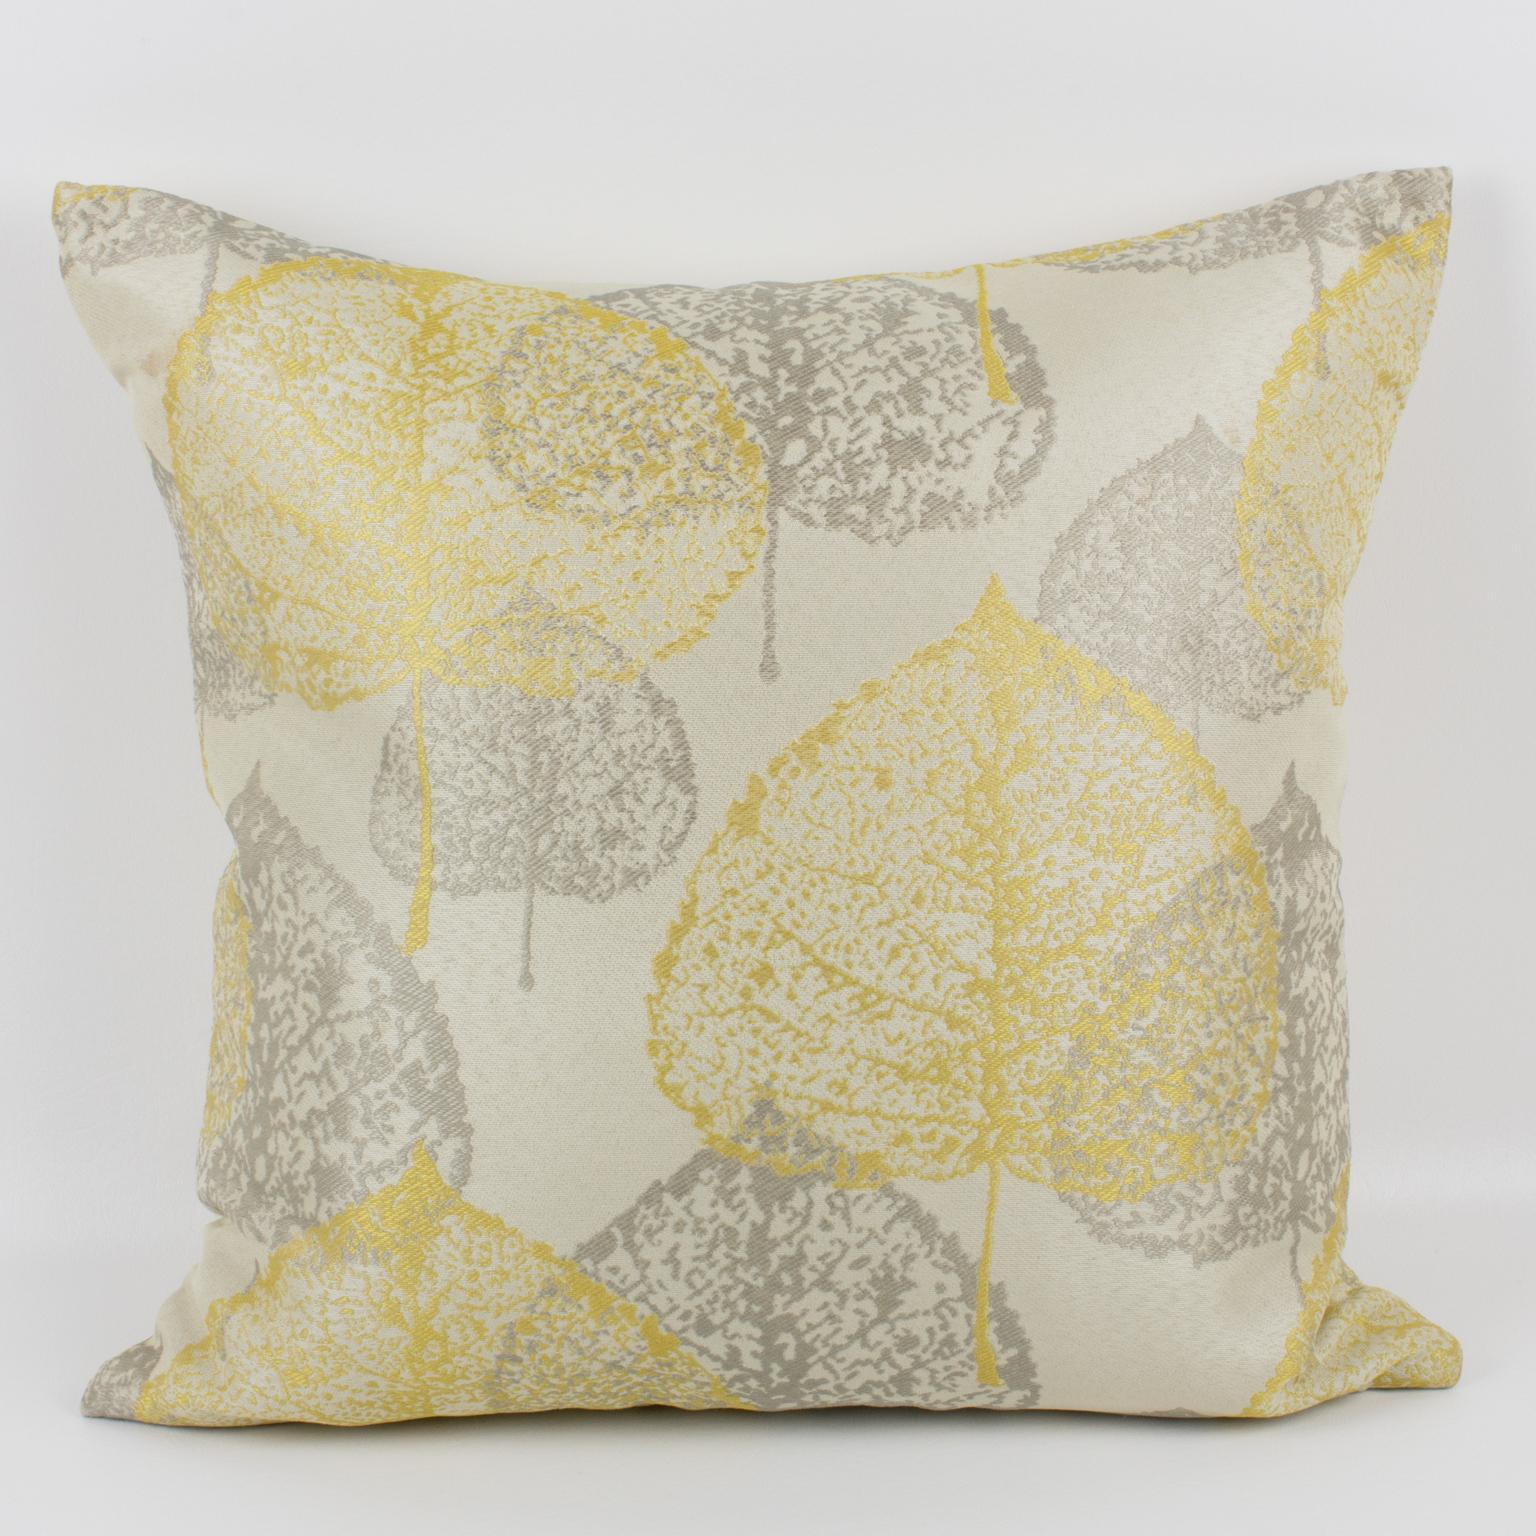 Unknown Yellow Silver-Gray Damask Throw Pillow, a pair